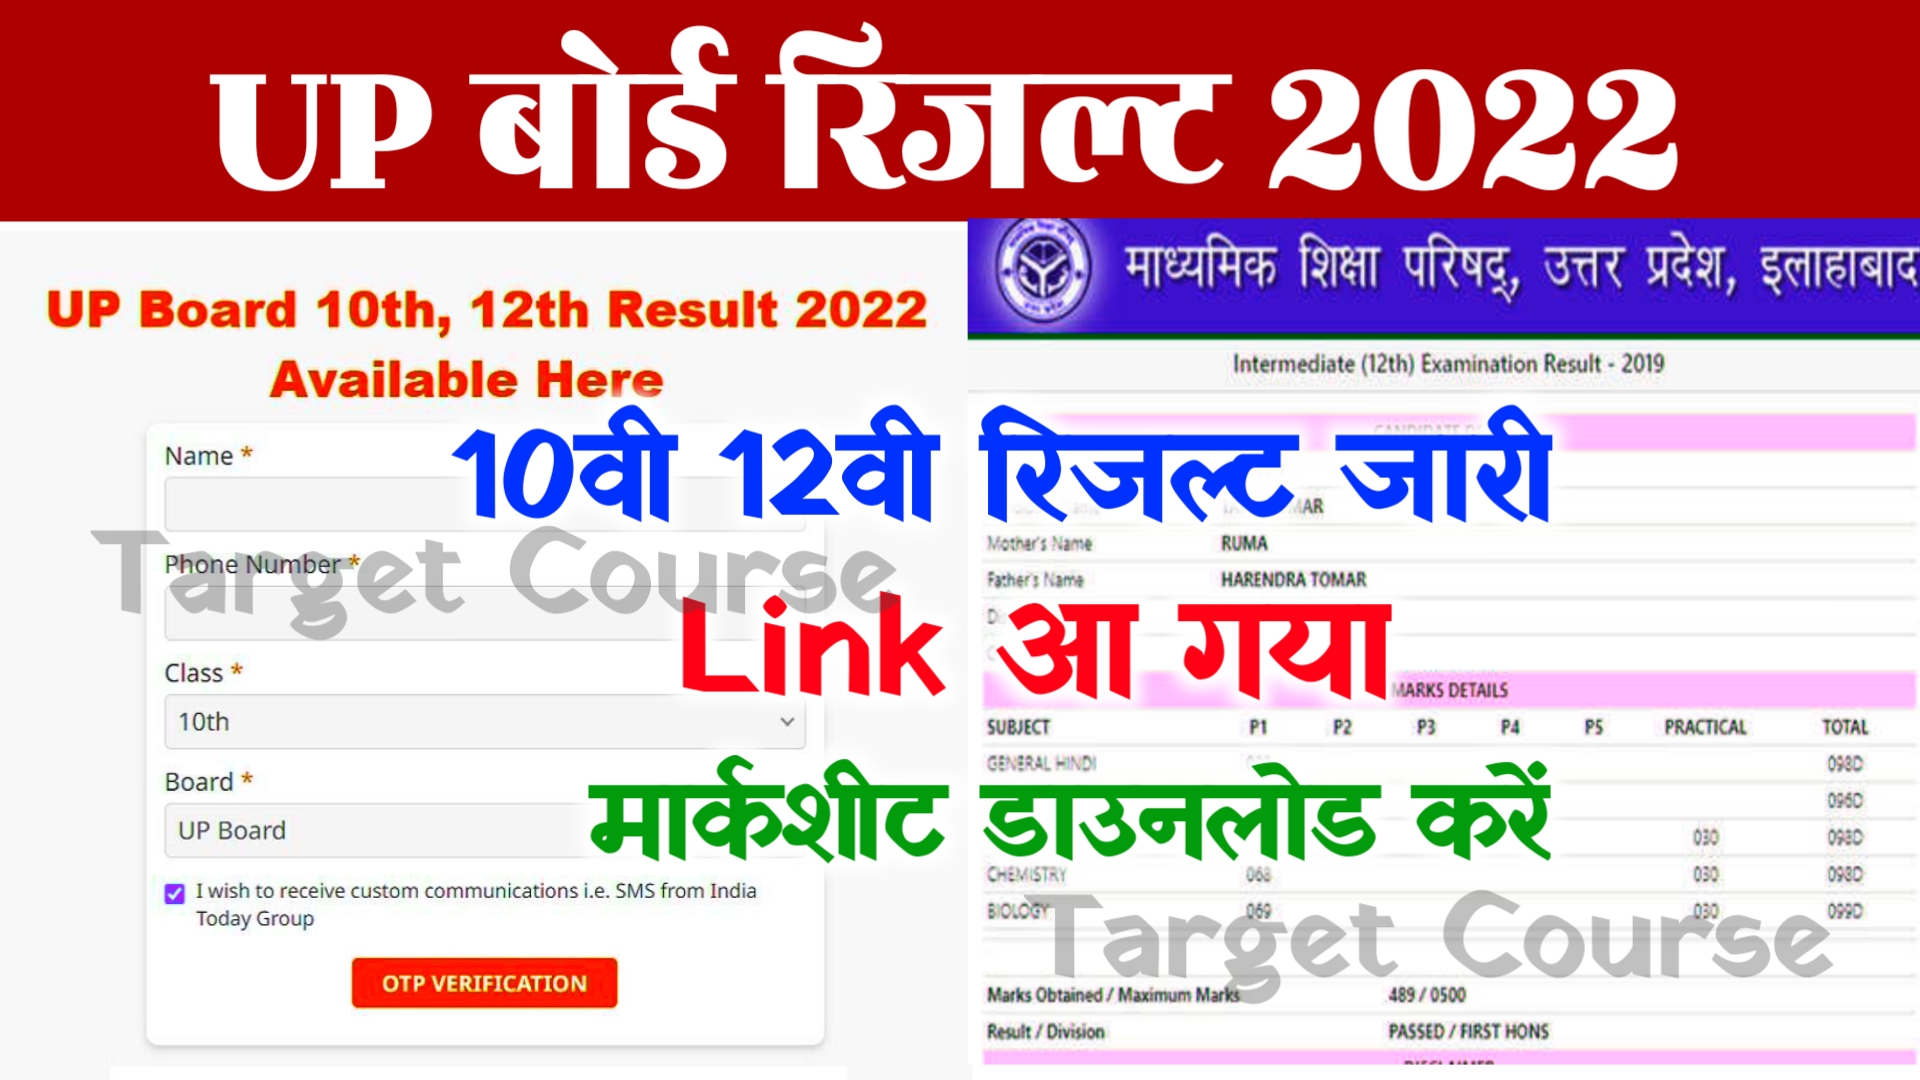 UP Board 10th 12th Result 2022 New Link ~ Check Result @upmsp.edu.in